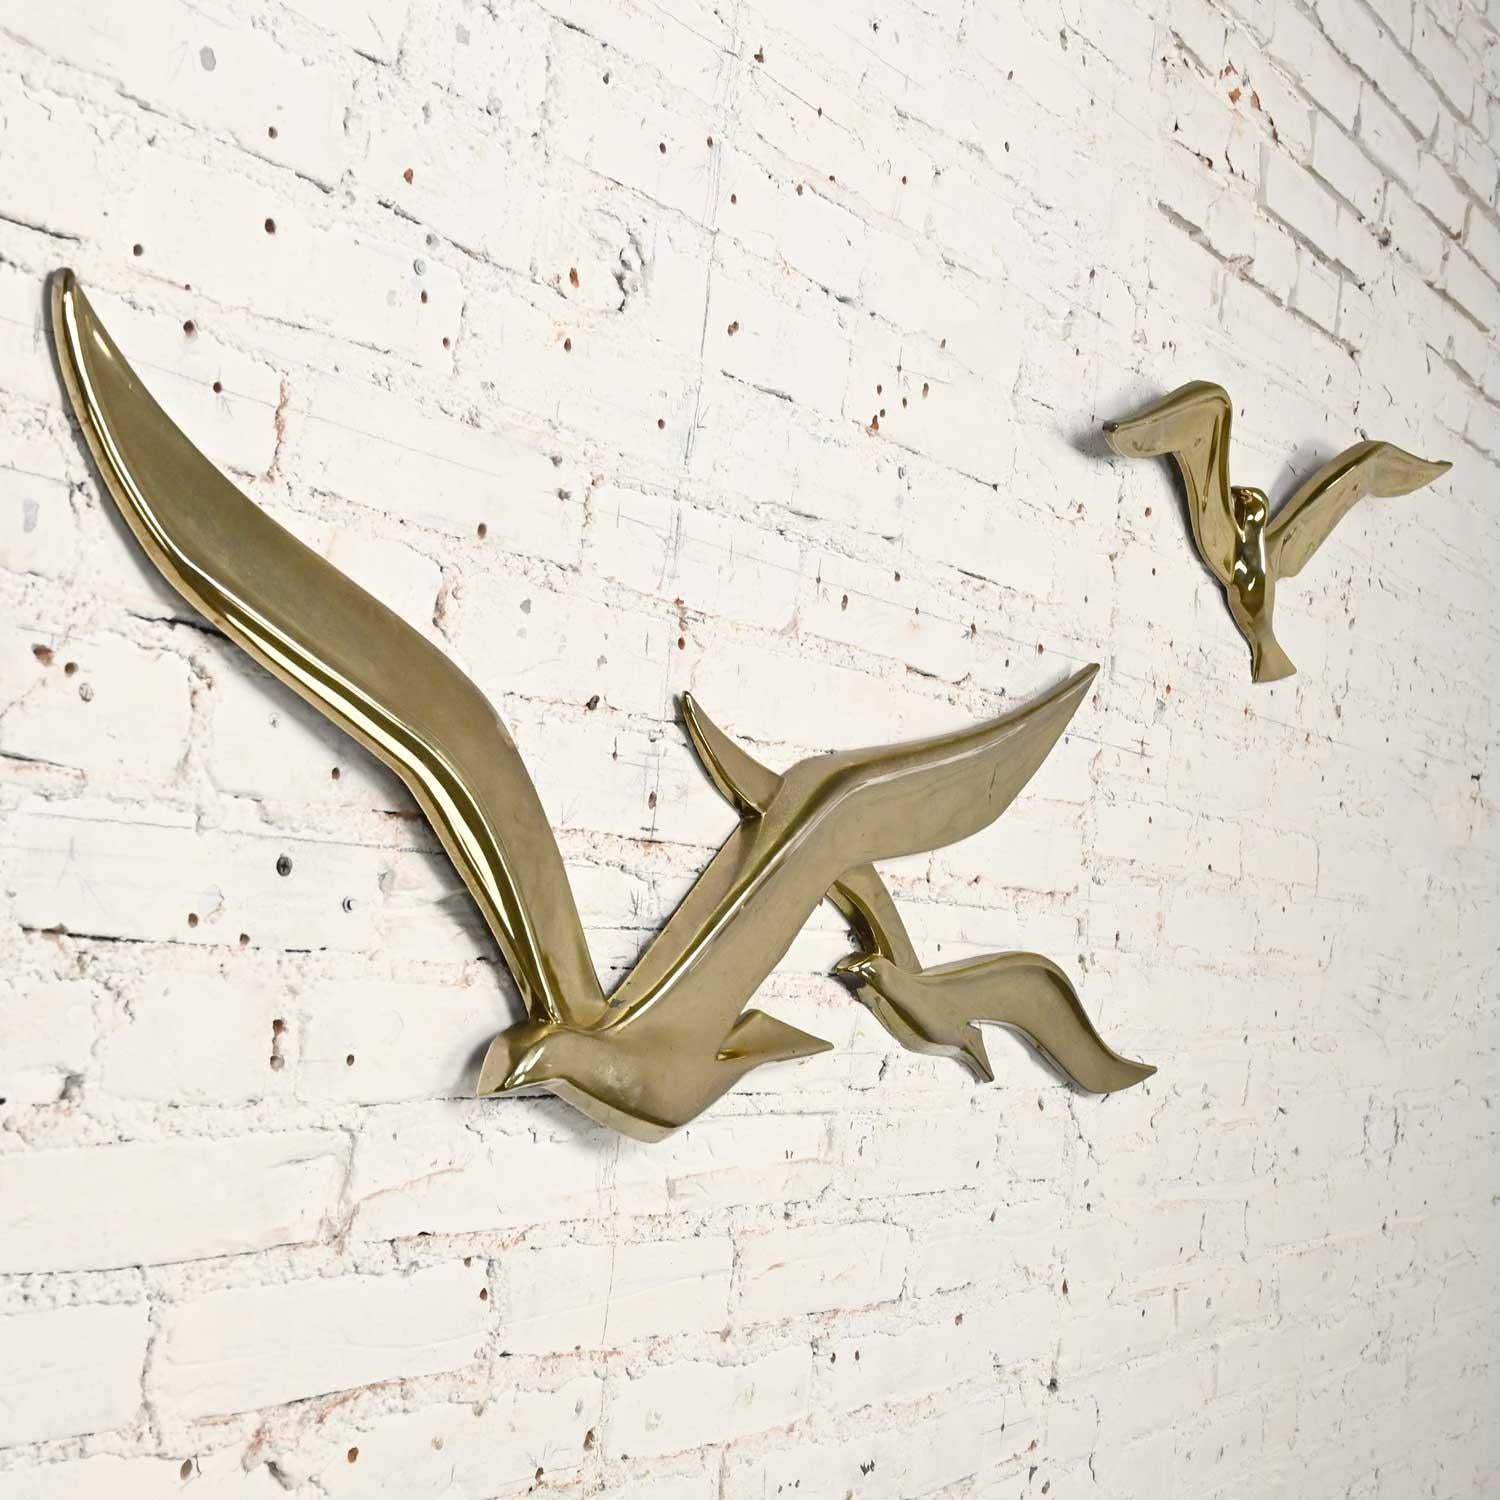 American Syroco MCM Gilded Plastic Seagulls in Flight 3 Birds 2-Piece Wall Sculpture